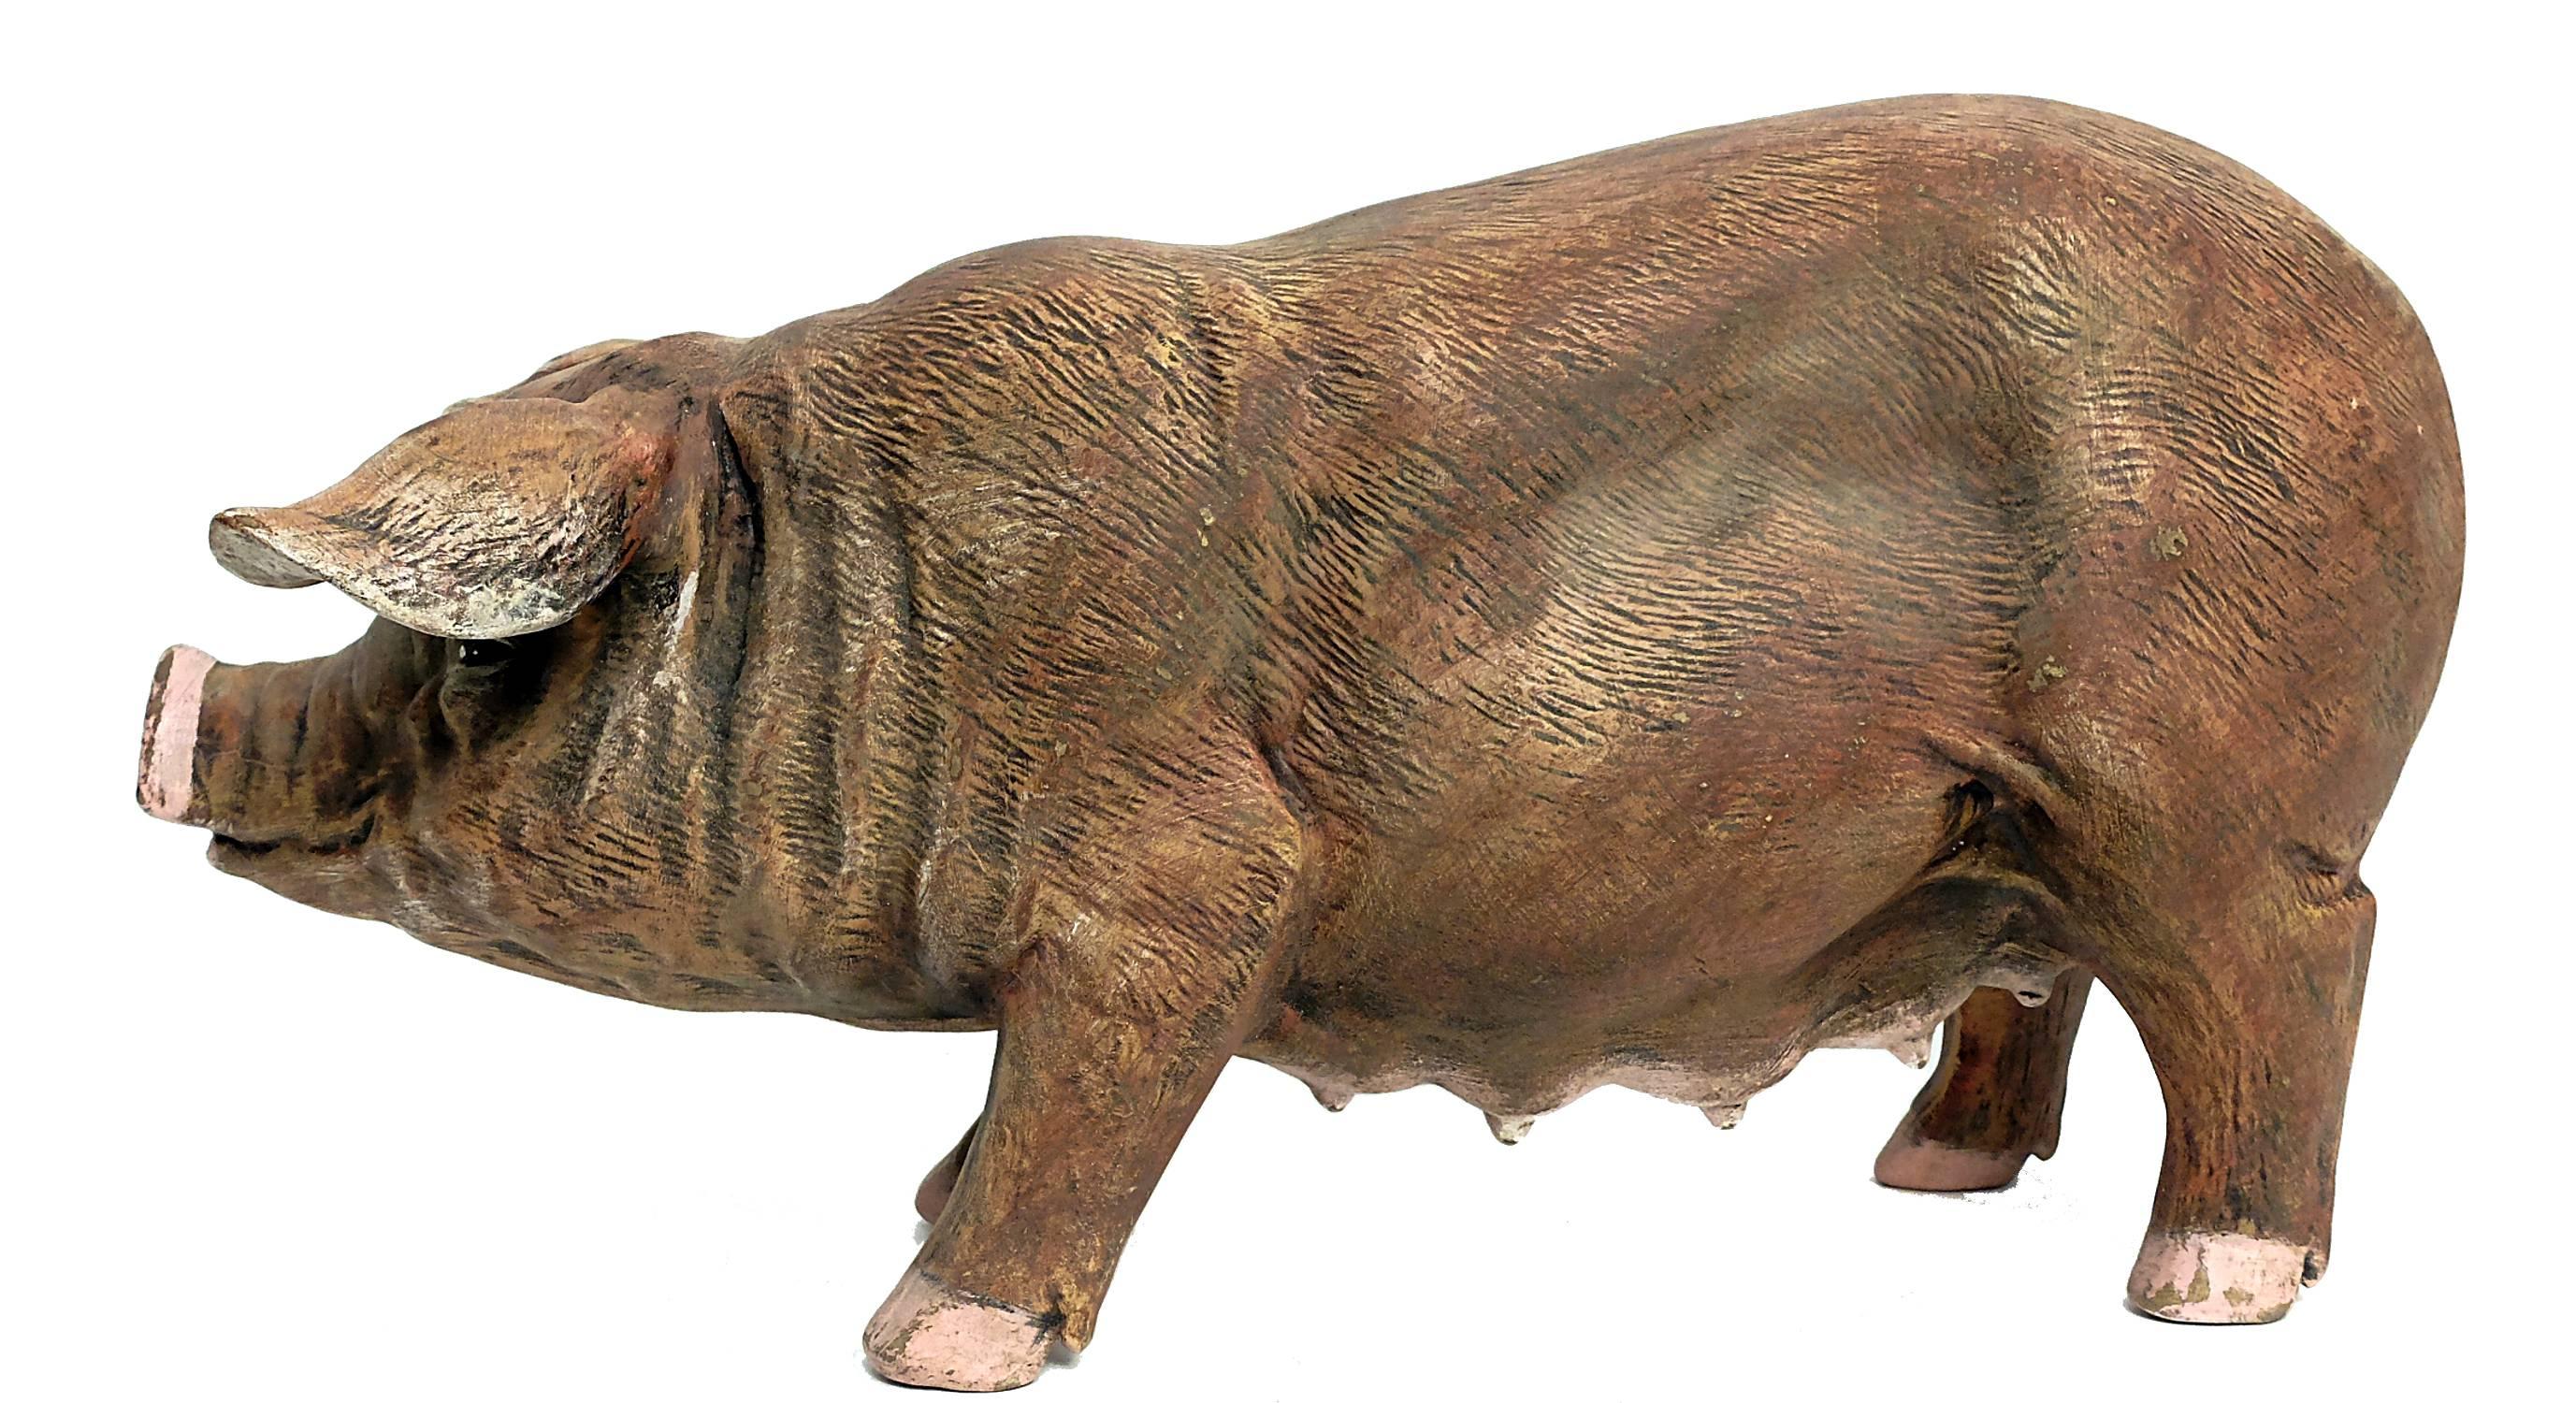 A painted faience sculpture depicting a pig for a contest winner best prize, Modena, Italy, circa 1900.